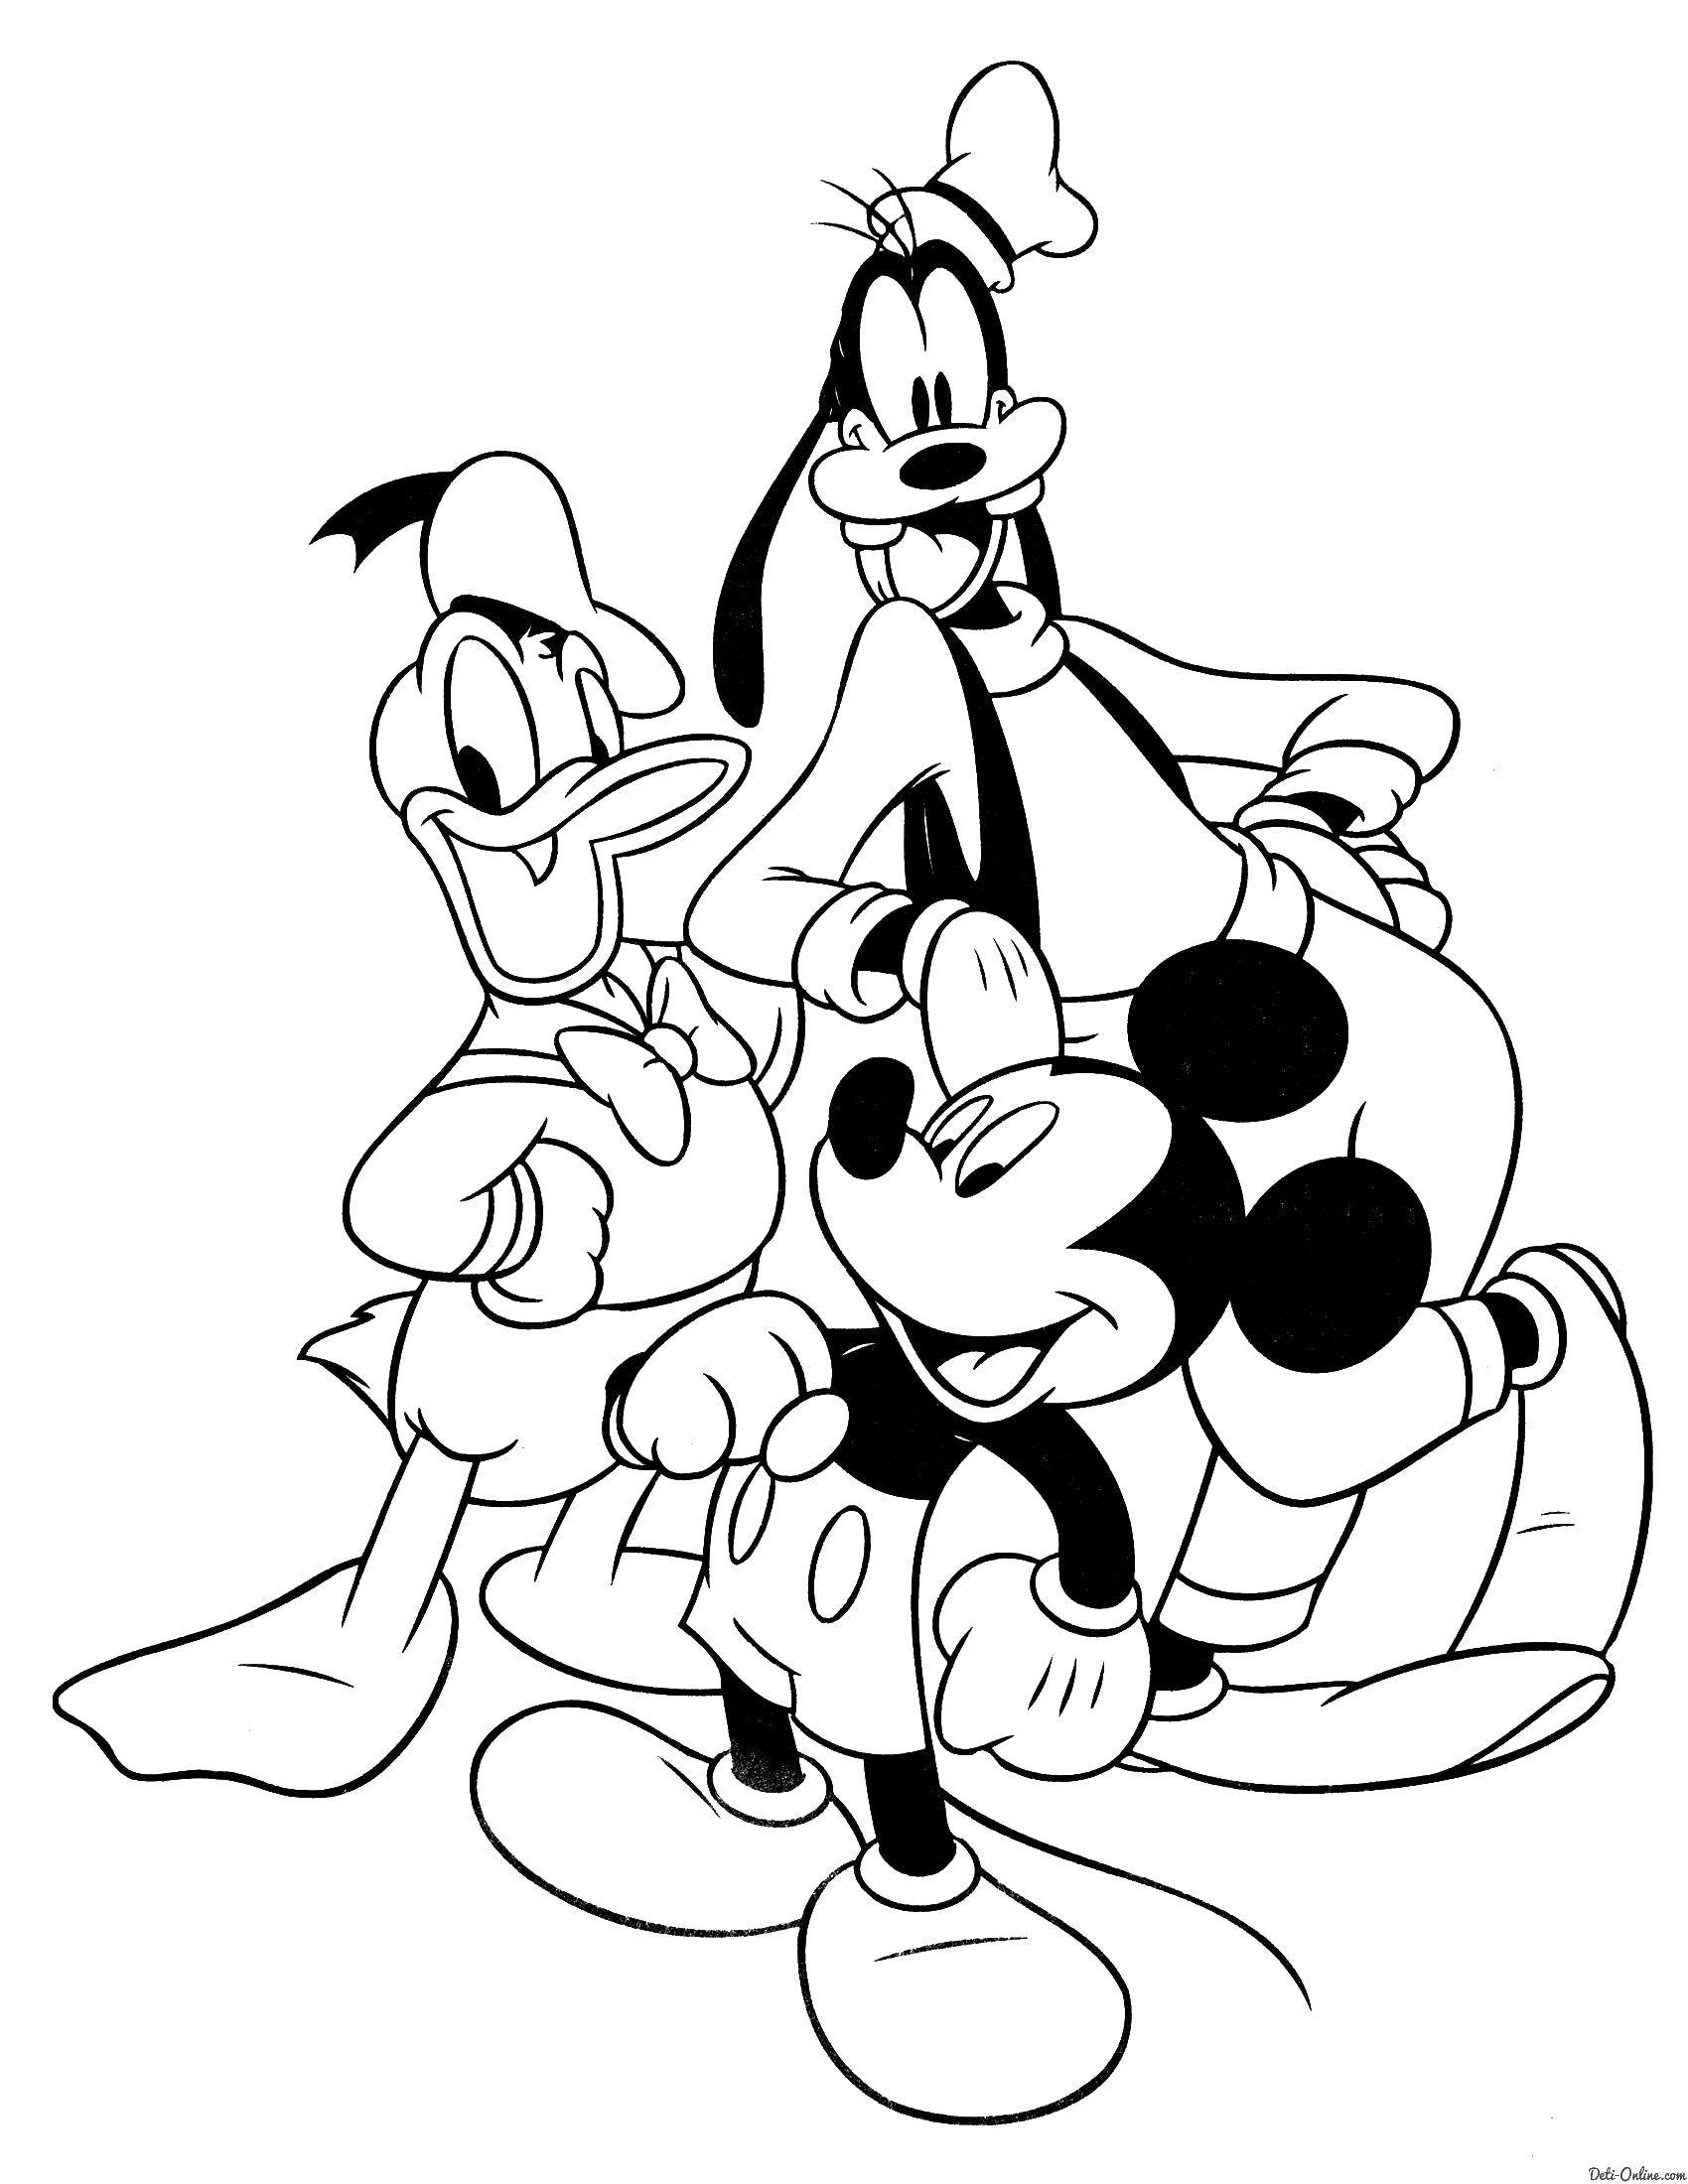 Coloring Mickey, Donald and goofy. Category Cartoon character. Tags:  Disney, Mickey Mouse, Donald Duck, Goofy.